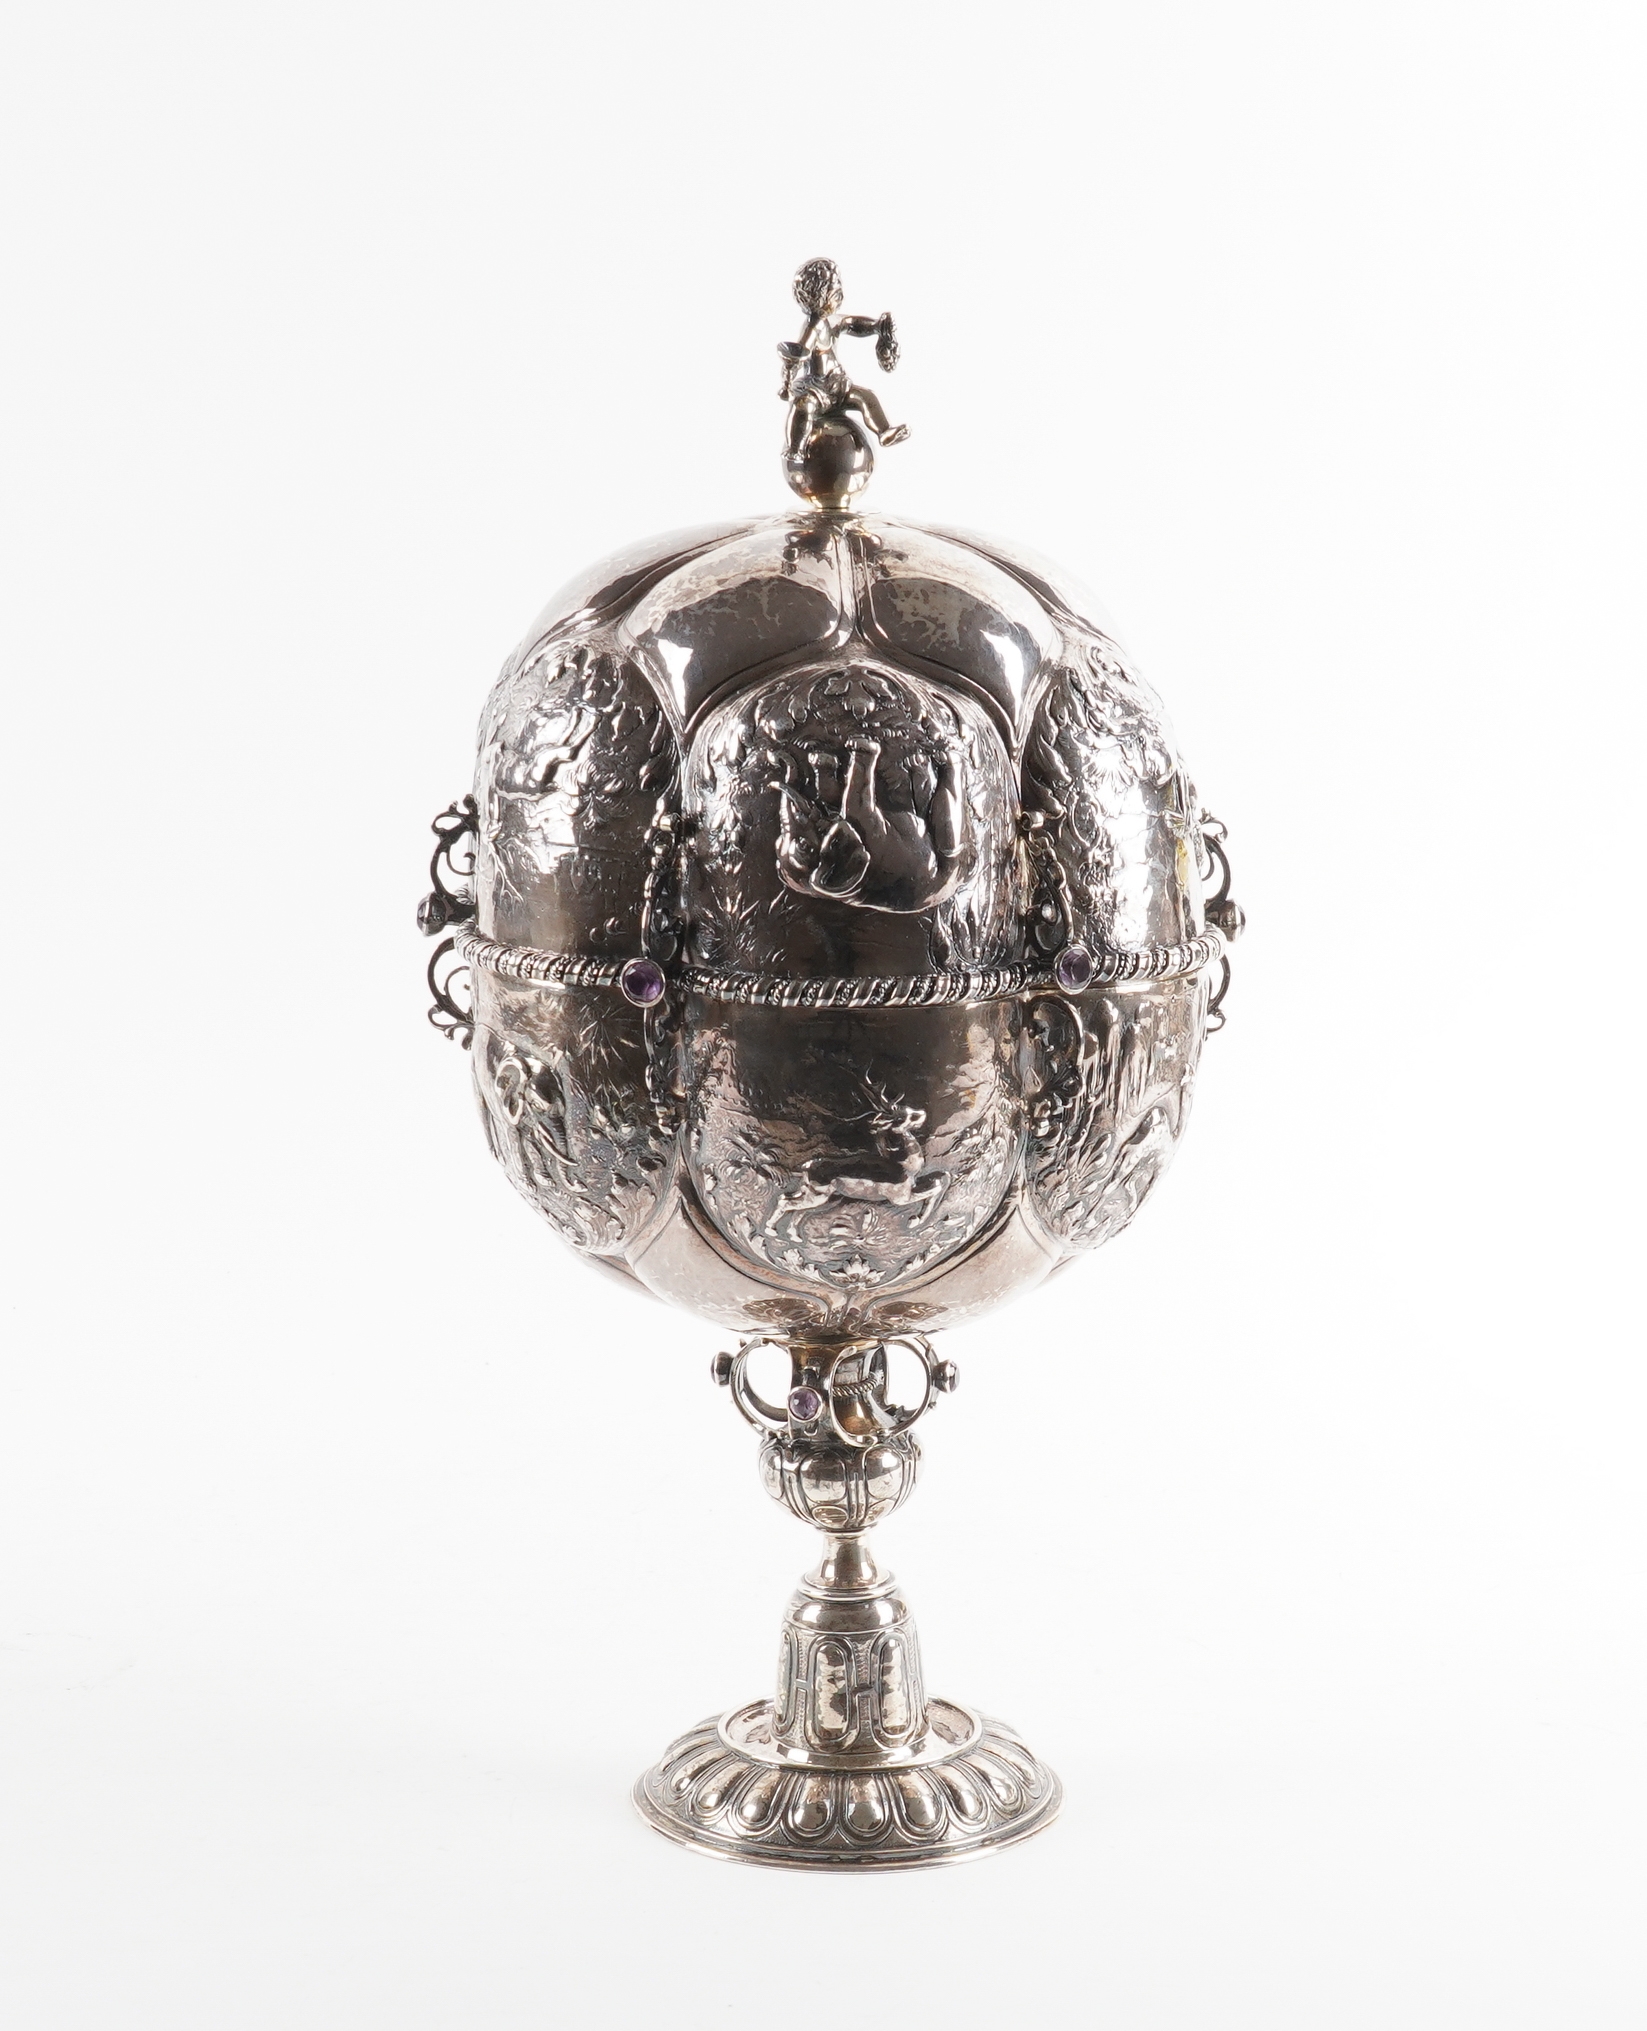 A DUTCH SILVER CIBORIUM AND COVER by Berthold Muller, import mark Chester 1902, height 35cm, gross weight 1260 gms £700-£1000